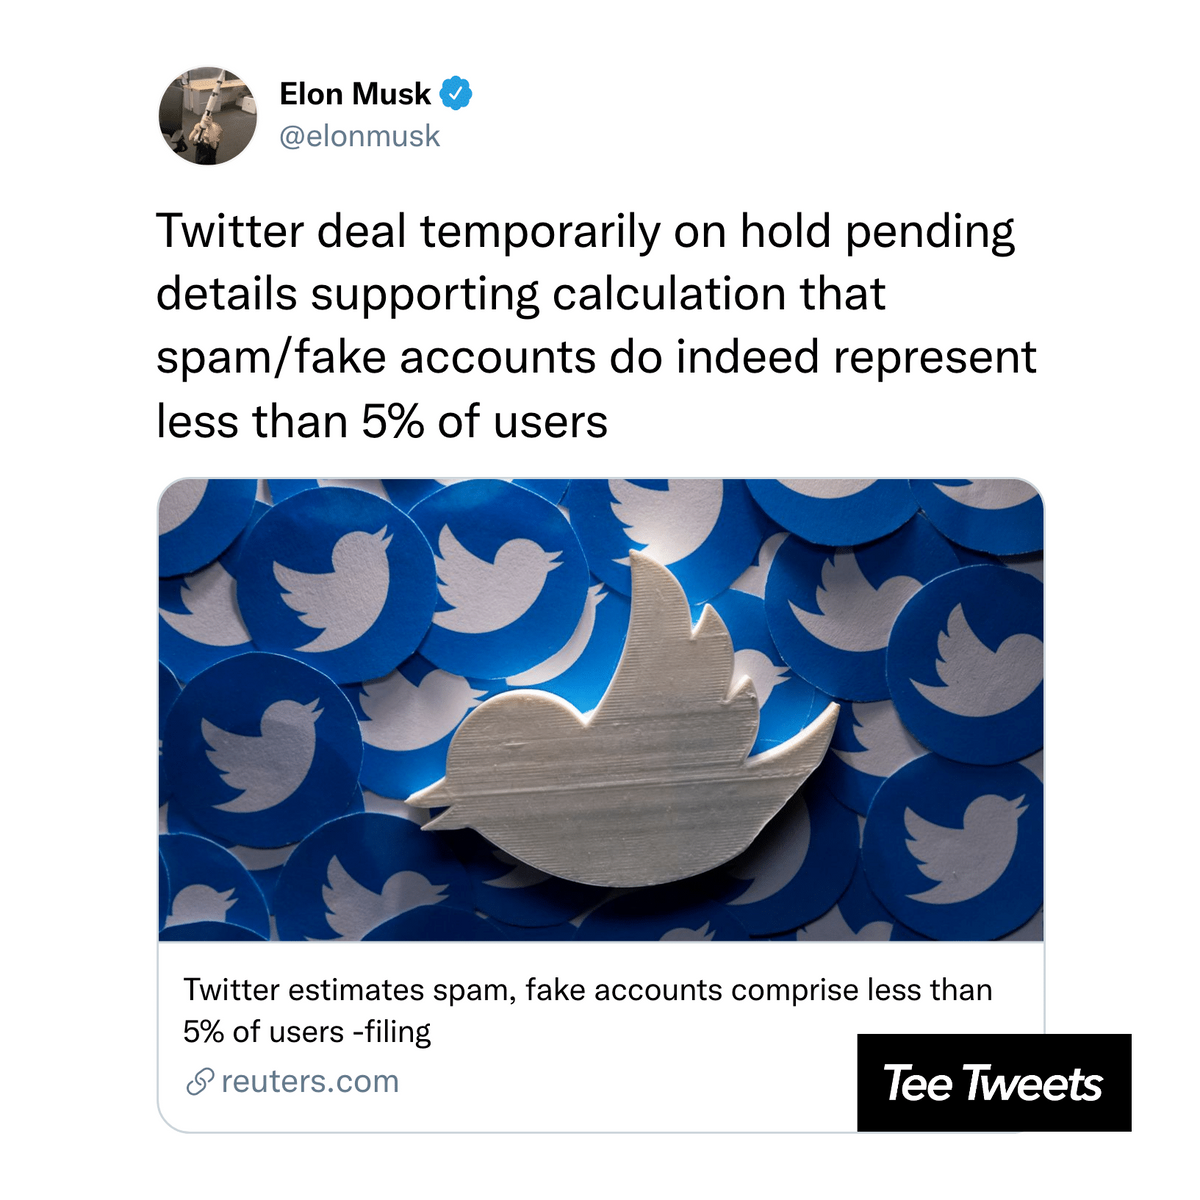 An Elon Musk tweet that reads, "Twitter deal temporarily on hold pending details supporting calculation that spam/fake accounts do indeed represent less than 5% of users"